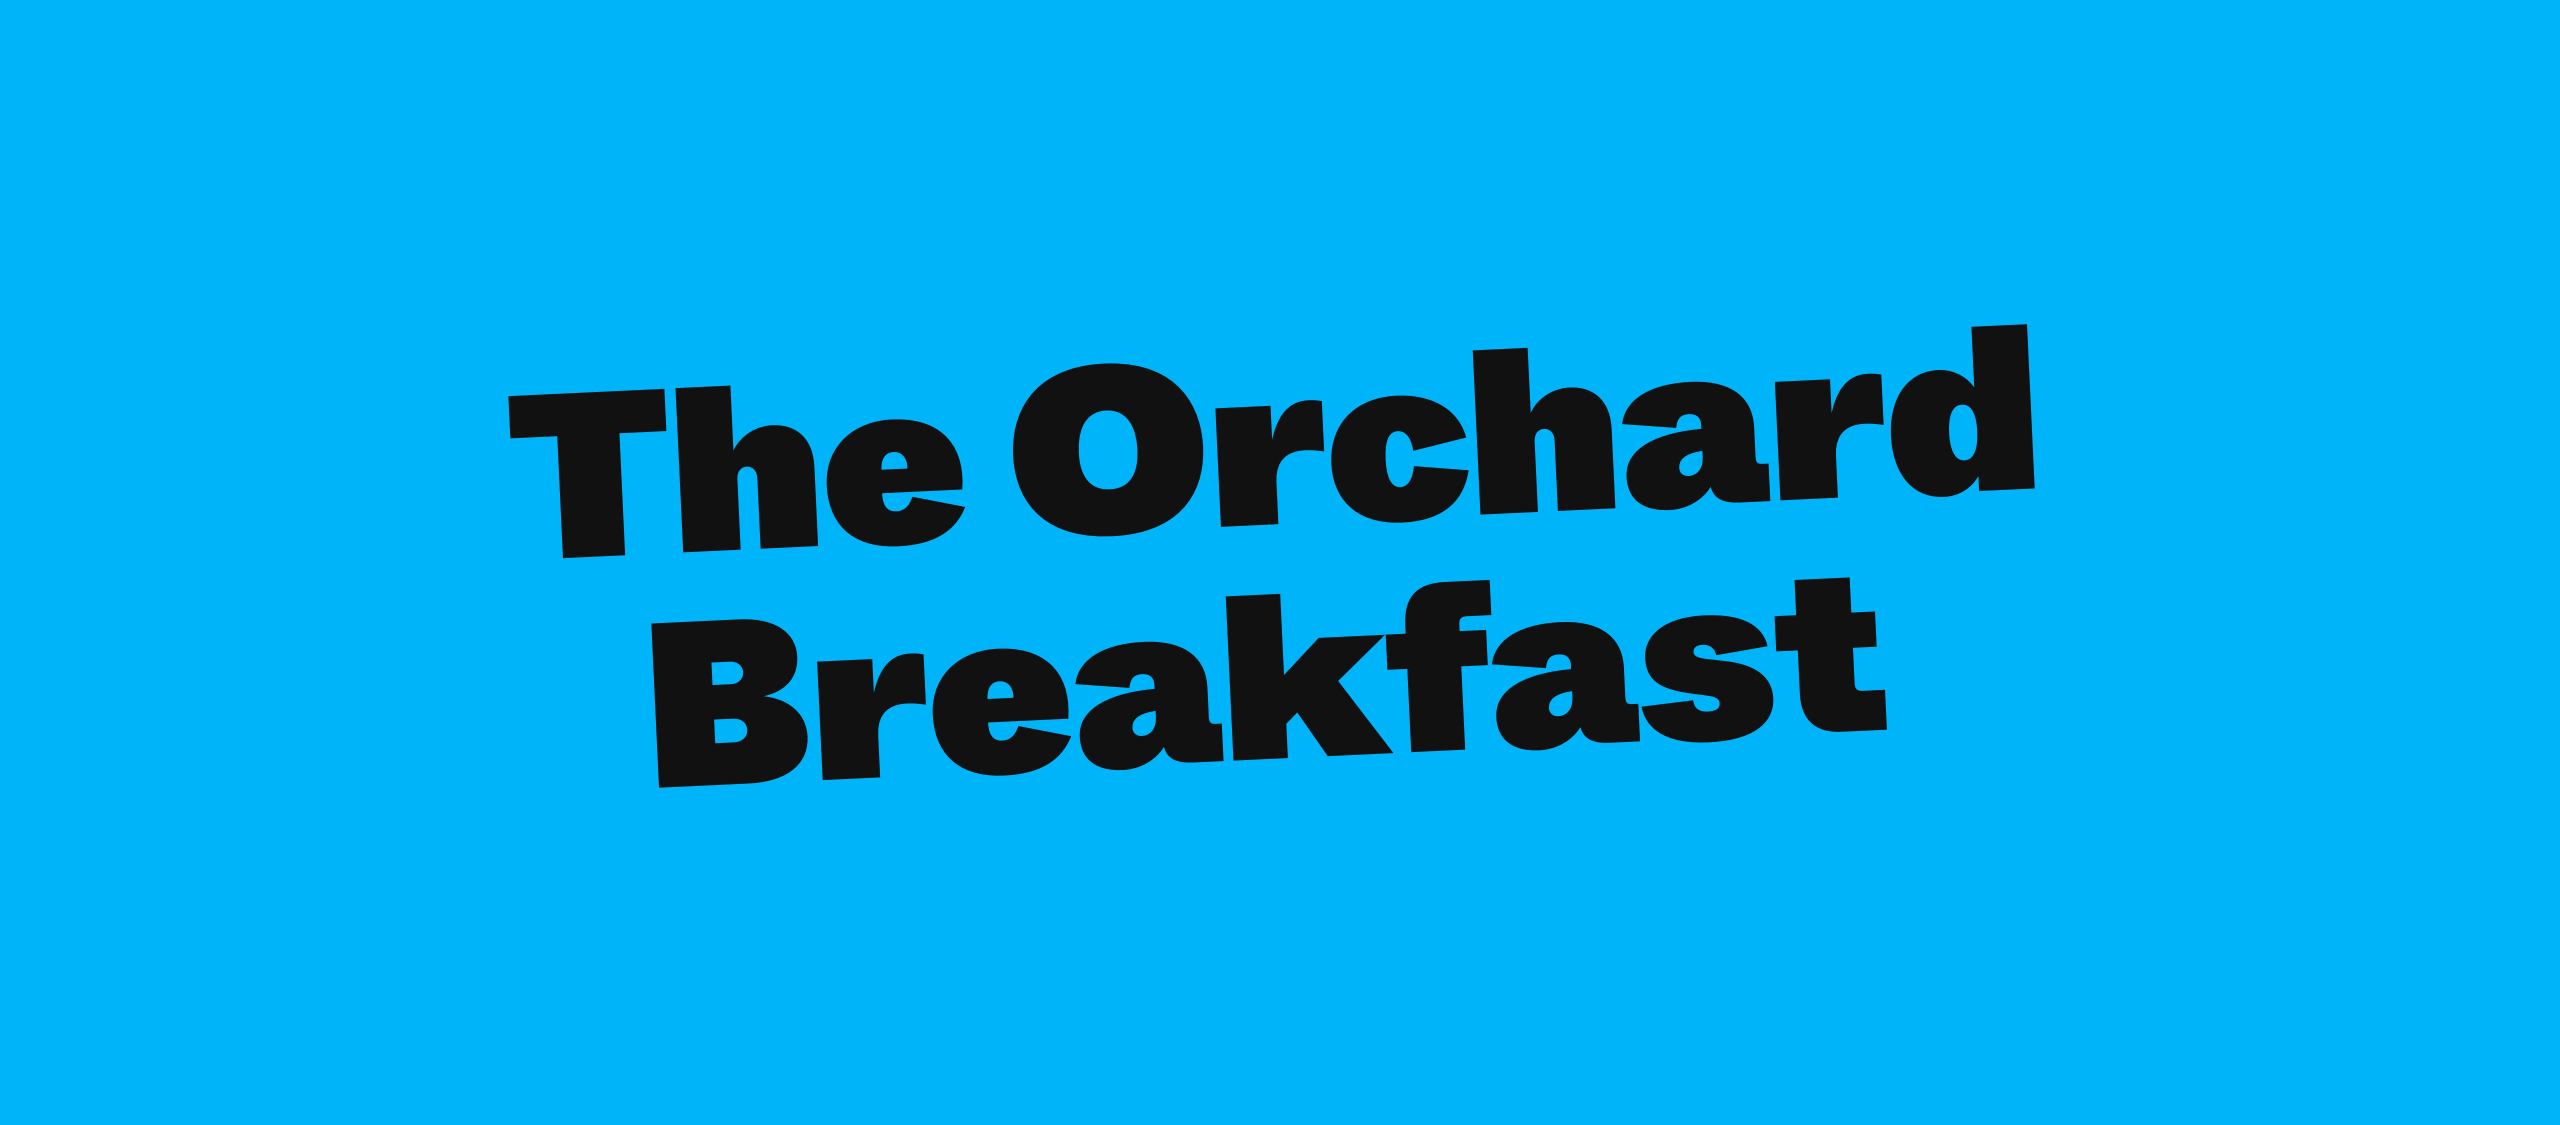 The Orchard Breakfast Reception